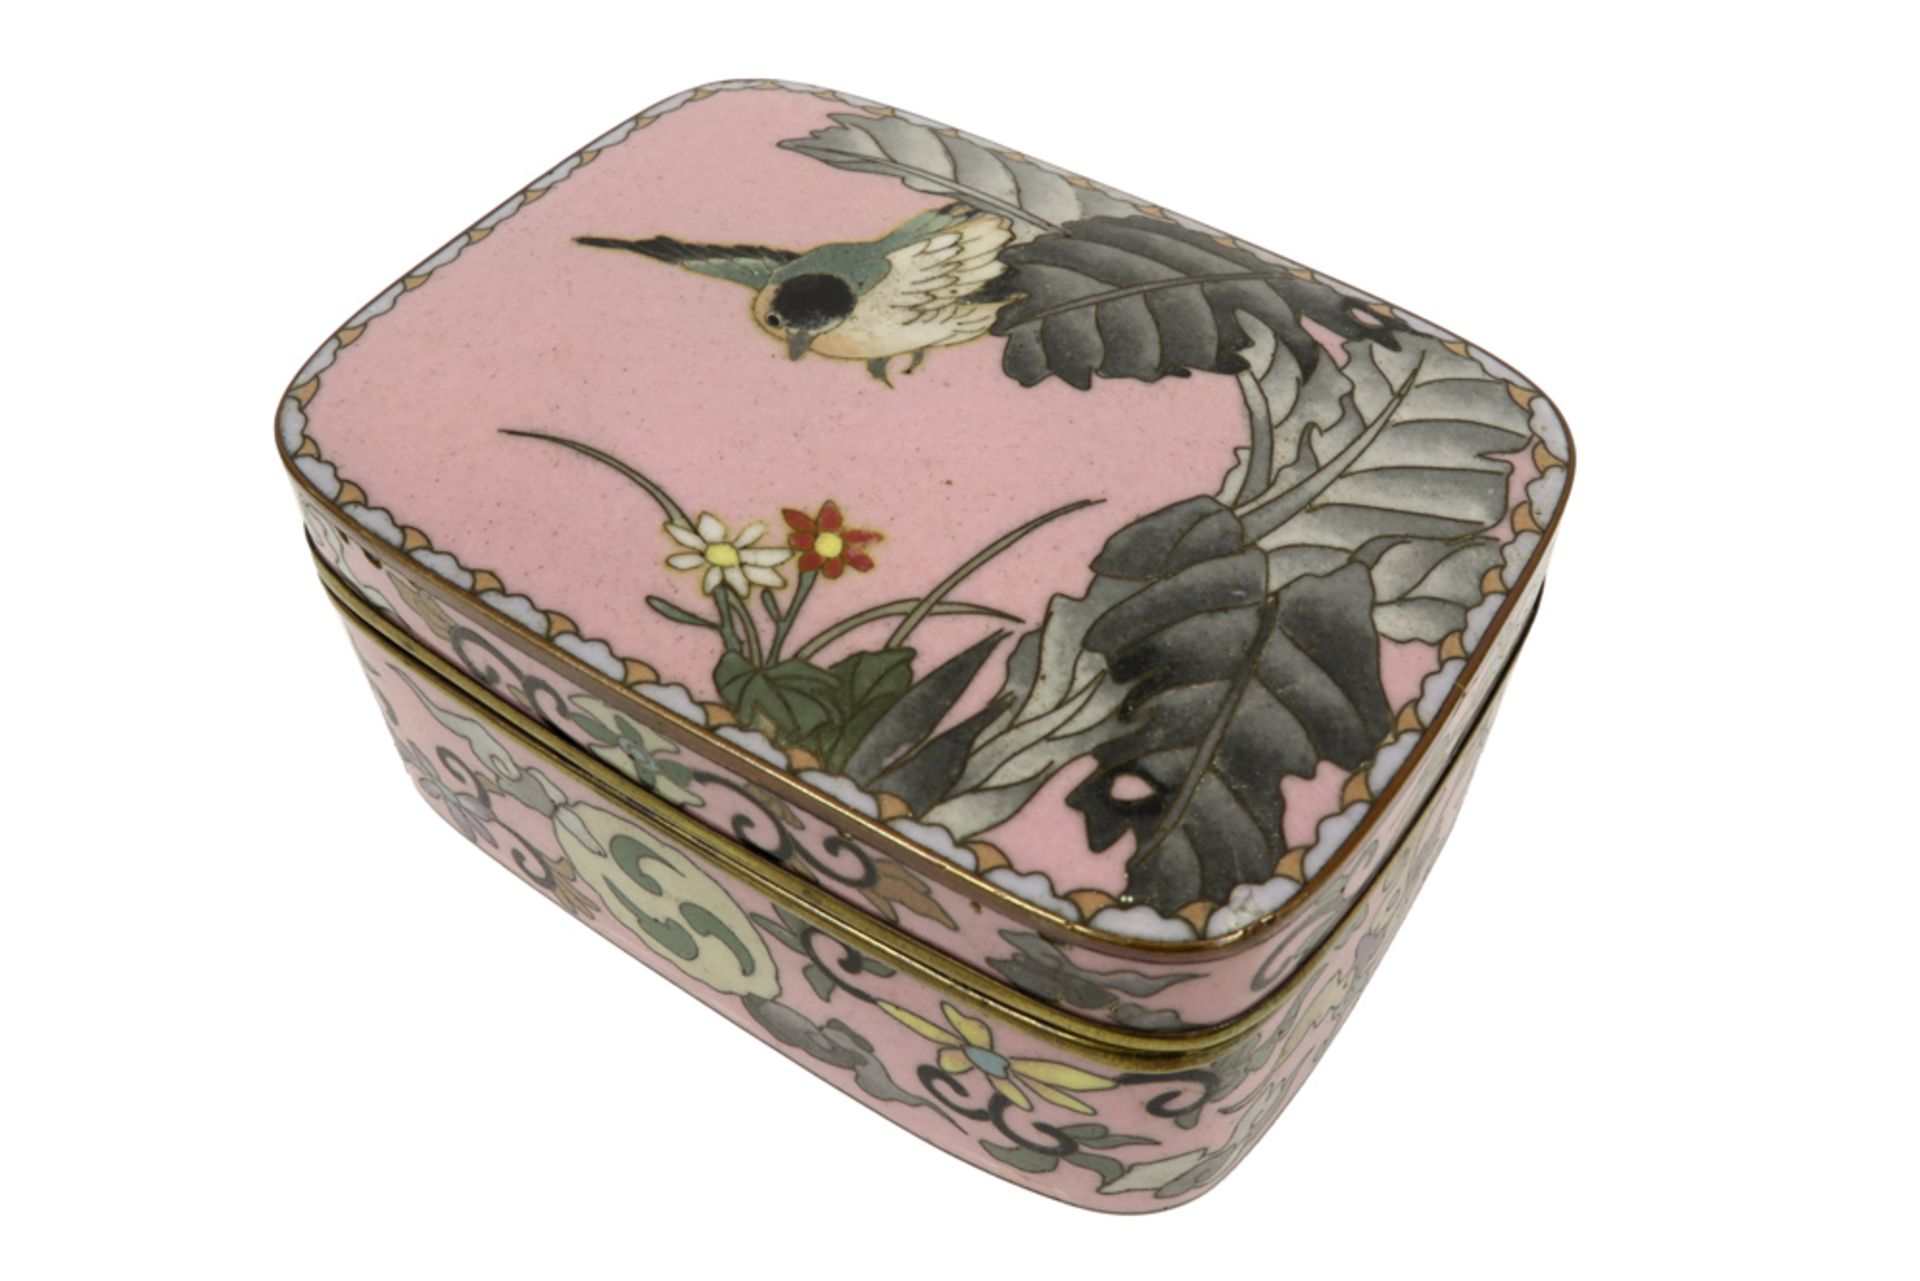 19th Cent. Chinese Qing period box in cloisonné with a polychrome birds and flowers decor || - Image 4 of 4